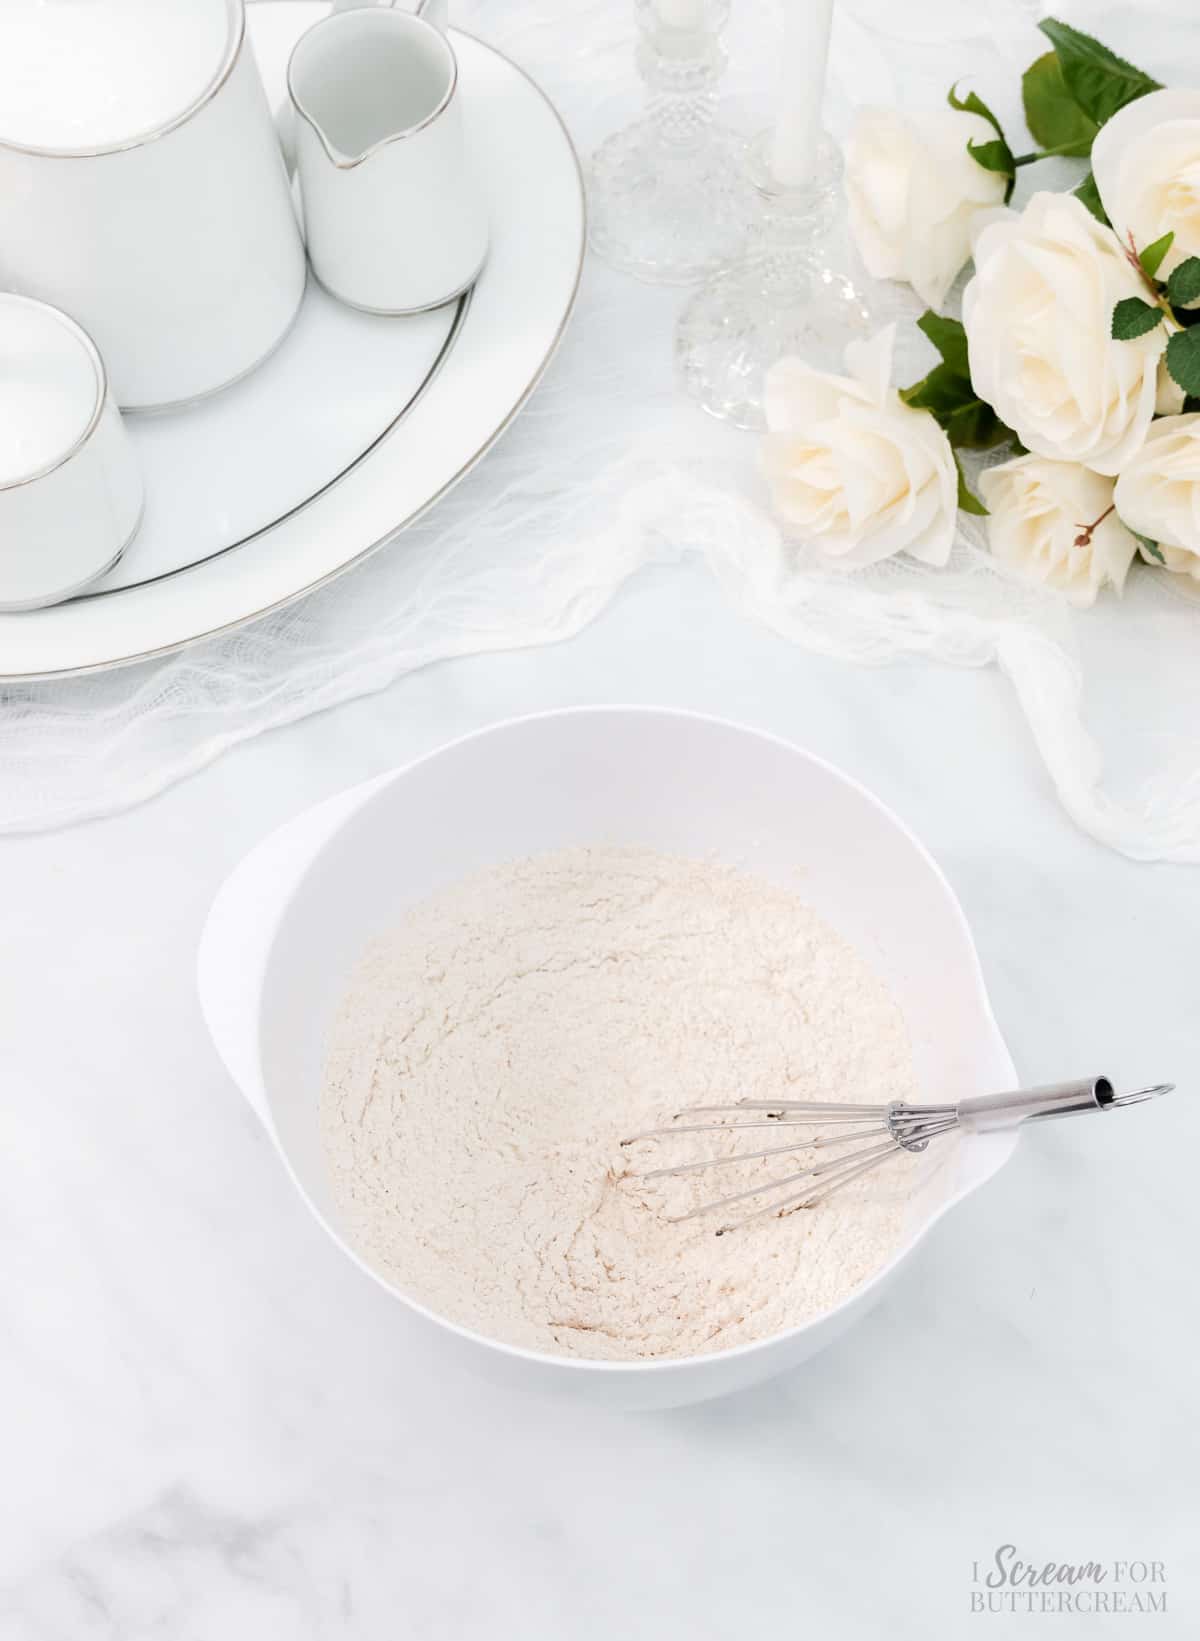 Dry cake batter ingredients in a white bowl with a whisk.